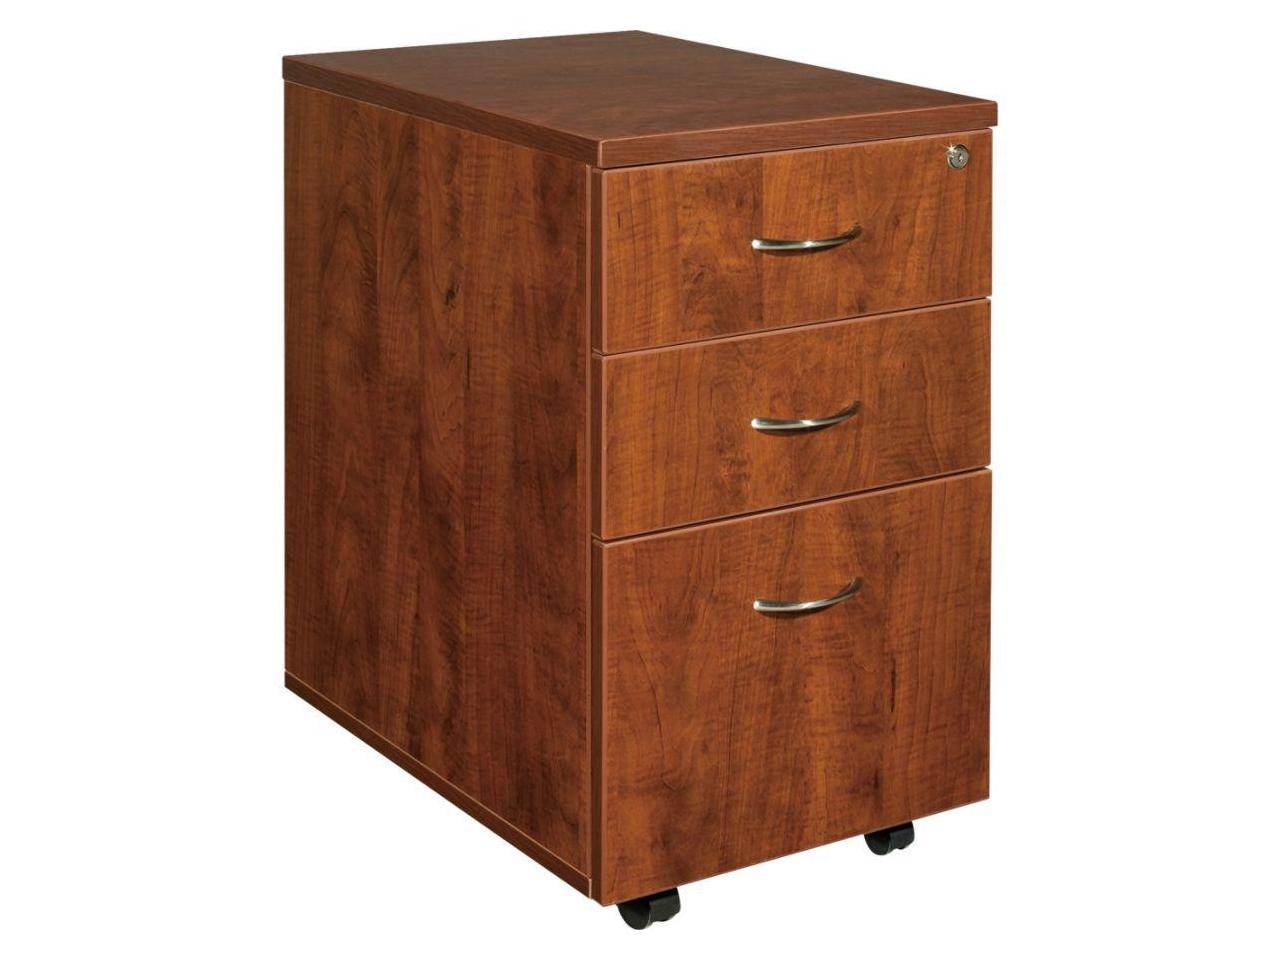 3 Drawers Vertical Wood Composite Lockable Filing Cabinet, Cherry - image 3 of 10